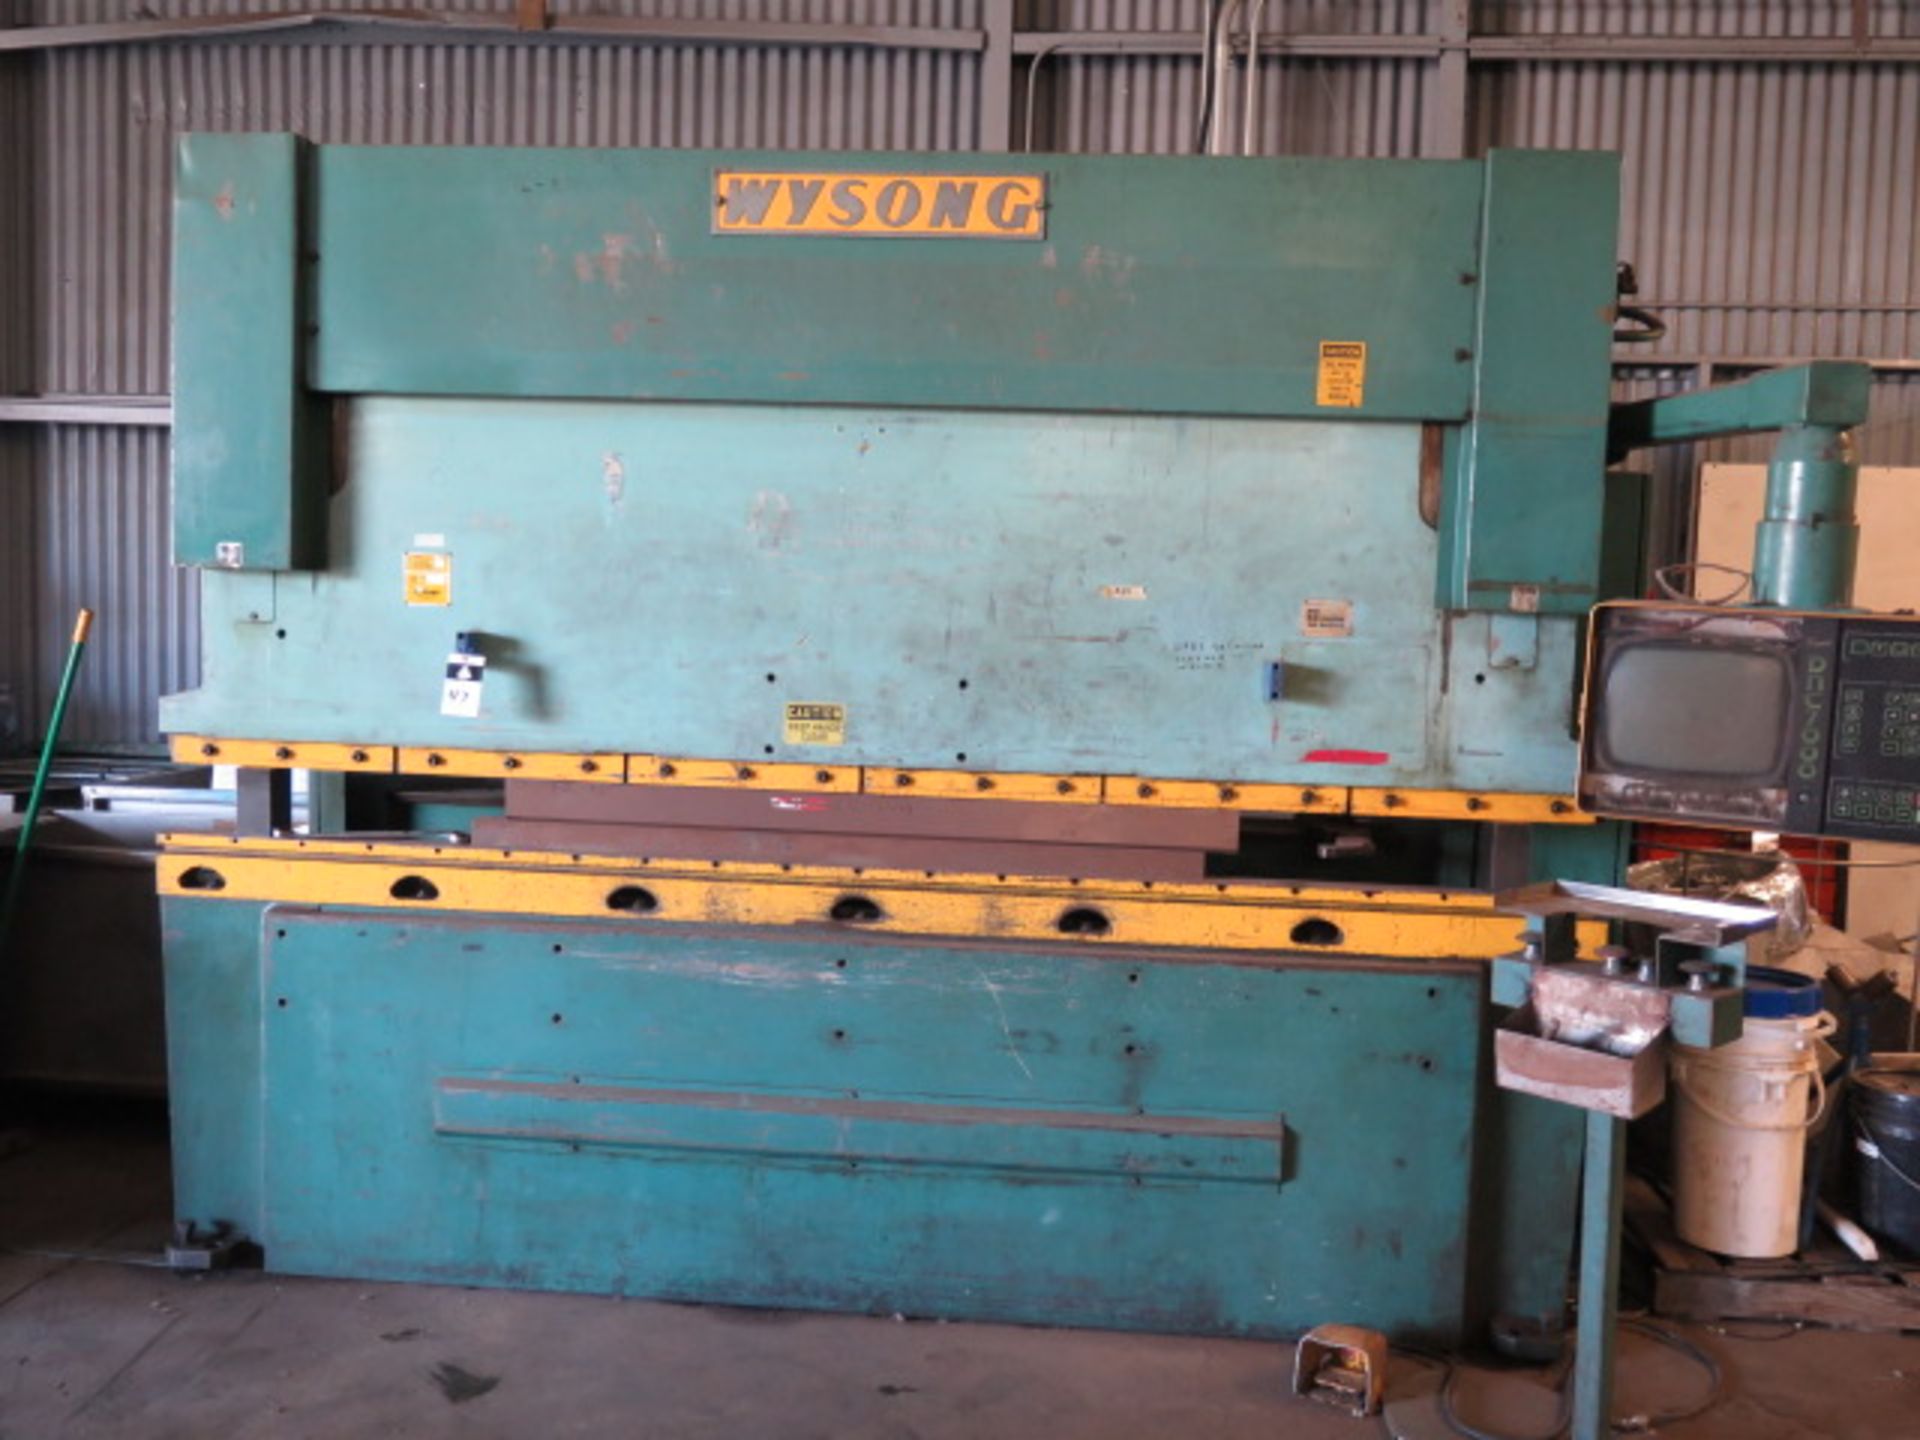 Wysong RT4-140 140 Ton x 10’ CNC Press Brake s/n R11-111-A w/ Graphic DNC7000 Controls, SOLD AS IS